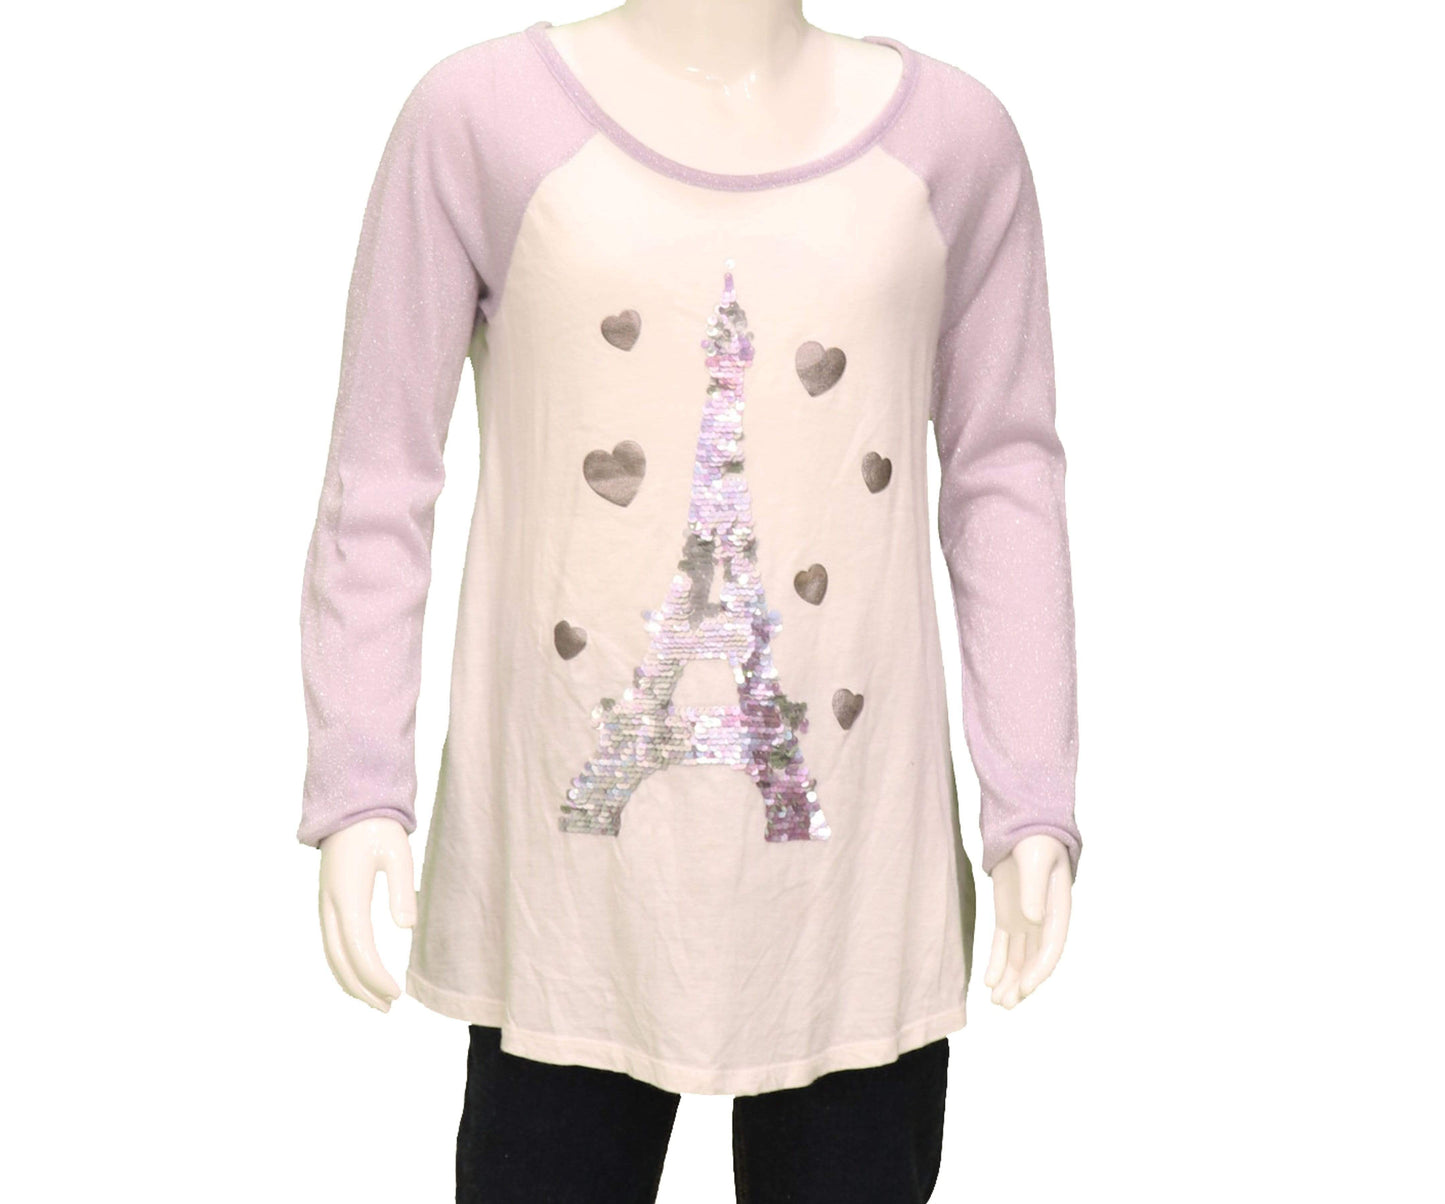 JUSTICE Apparel 12 Years / Purple - White JUSTICE - Kids - Glitter Print Long Sleeve Top